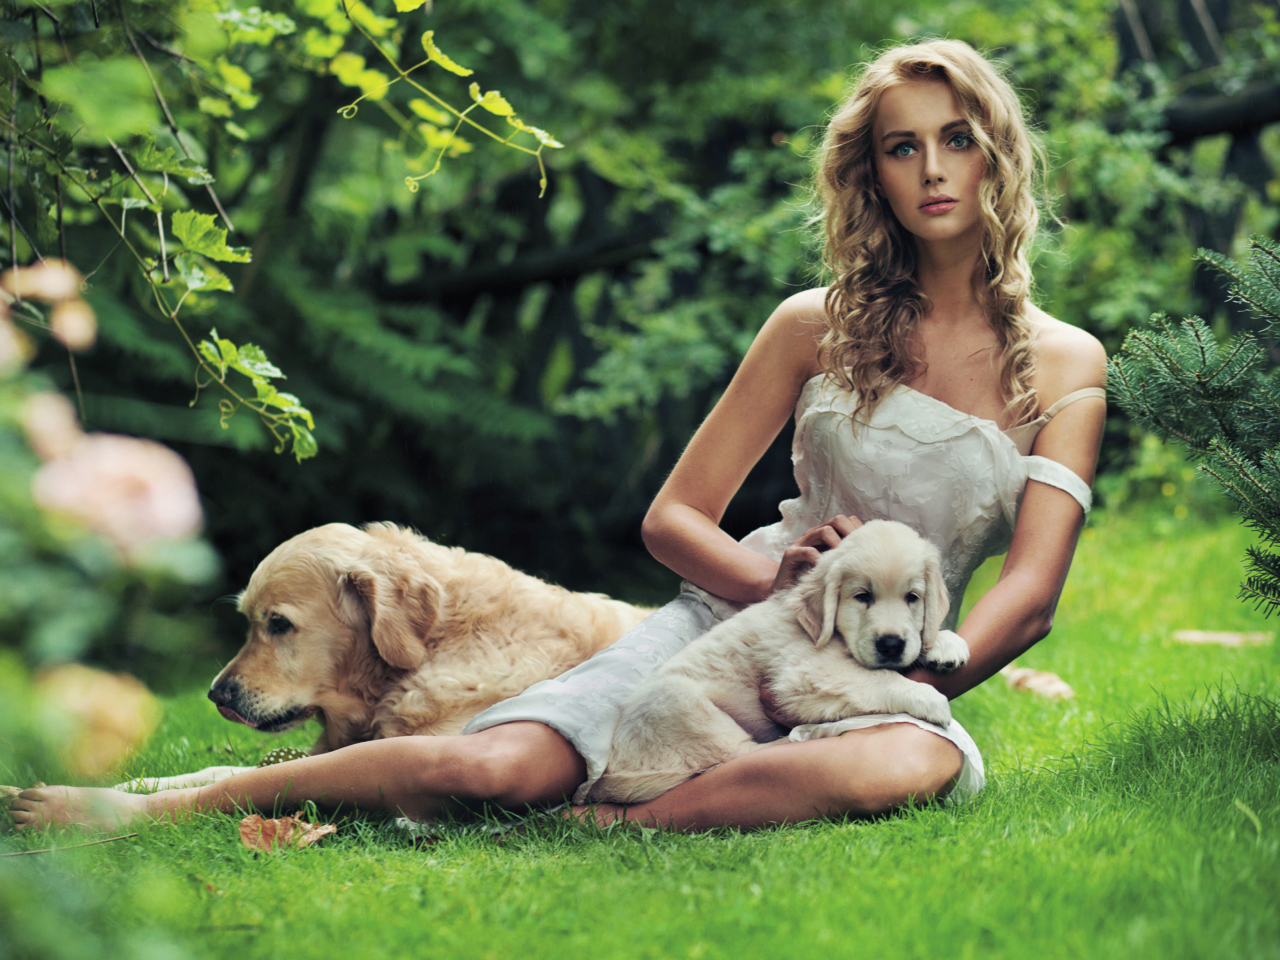 Model And Dogs wallpaper 1280x960